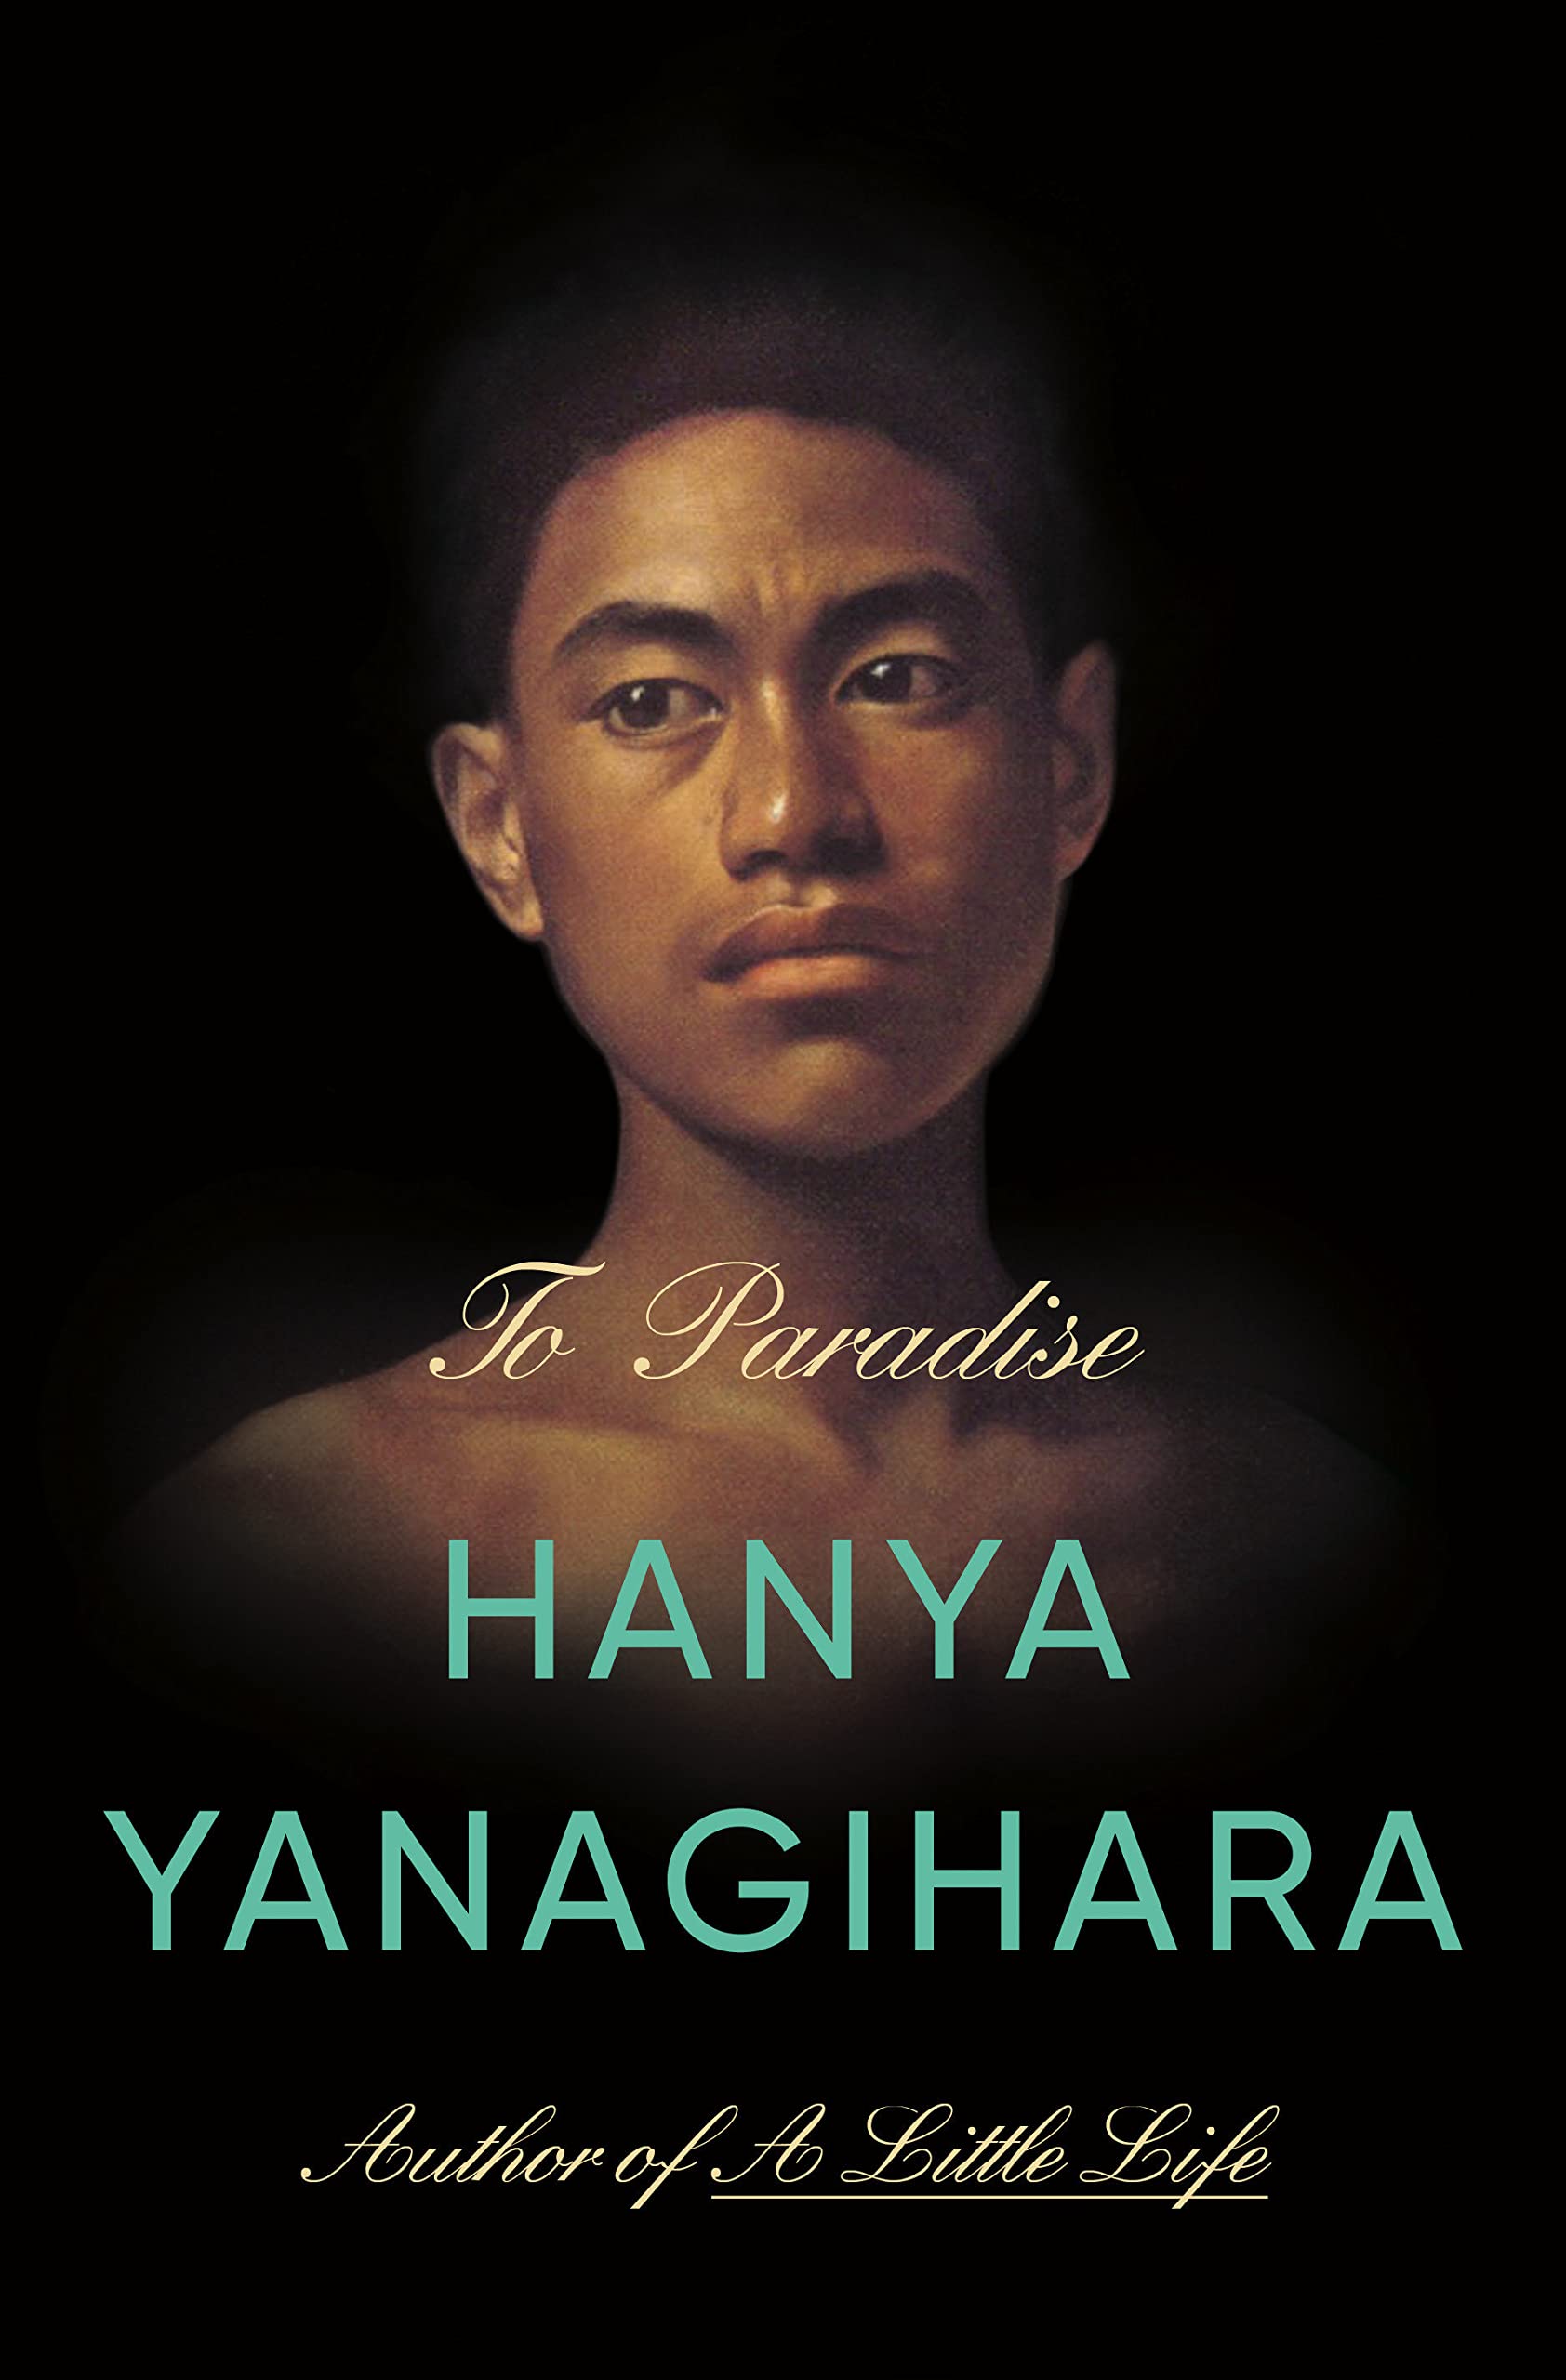 "To Paradise by Hanya Yanagihara; author of A Little Life" — Image shows a young woman's face